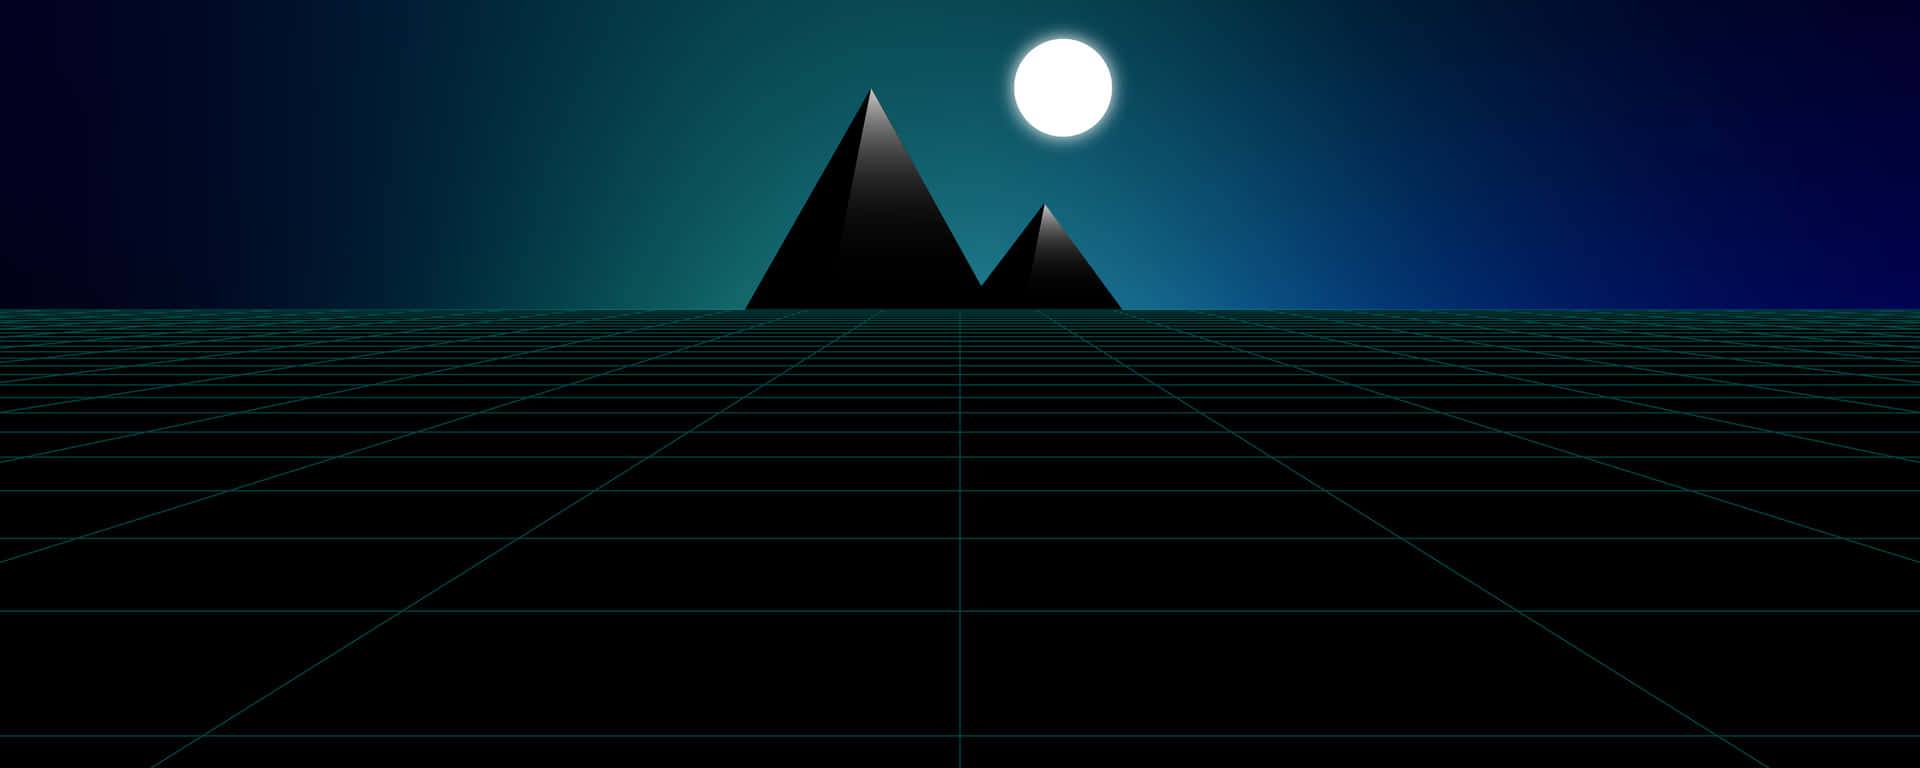 Pyramid Of The Moon Landscape Wallpaper